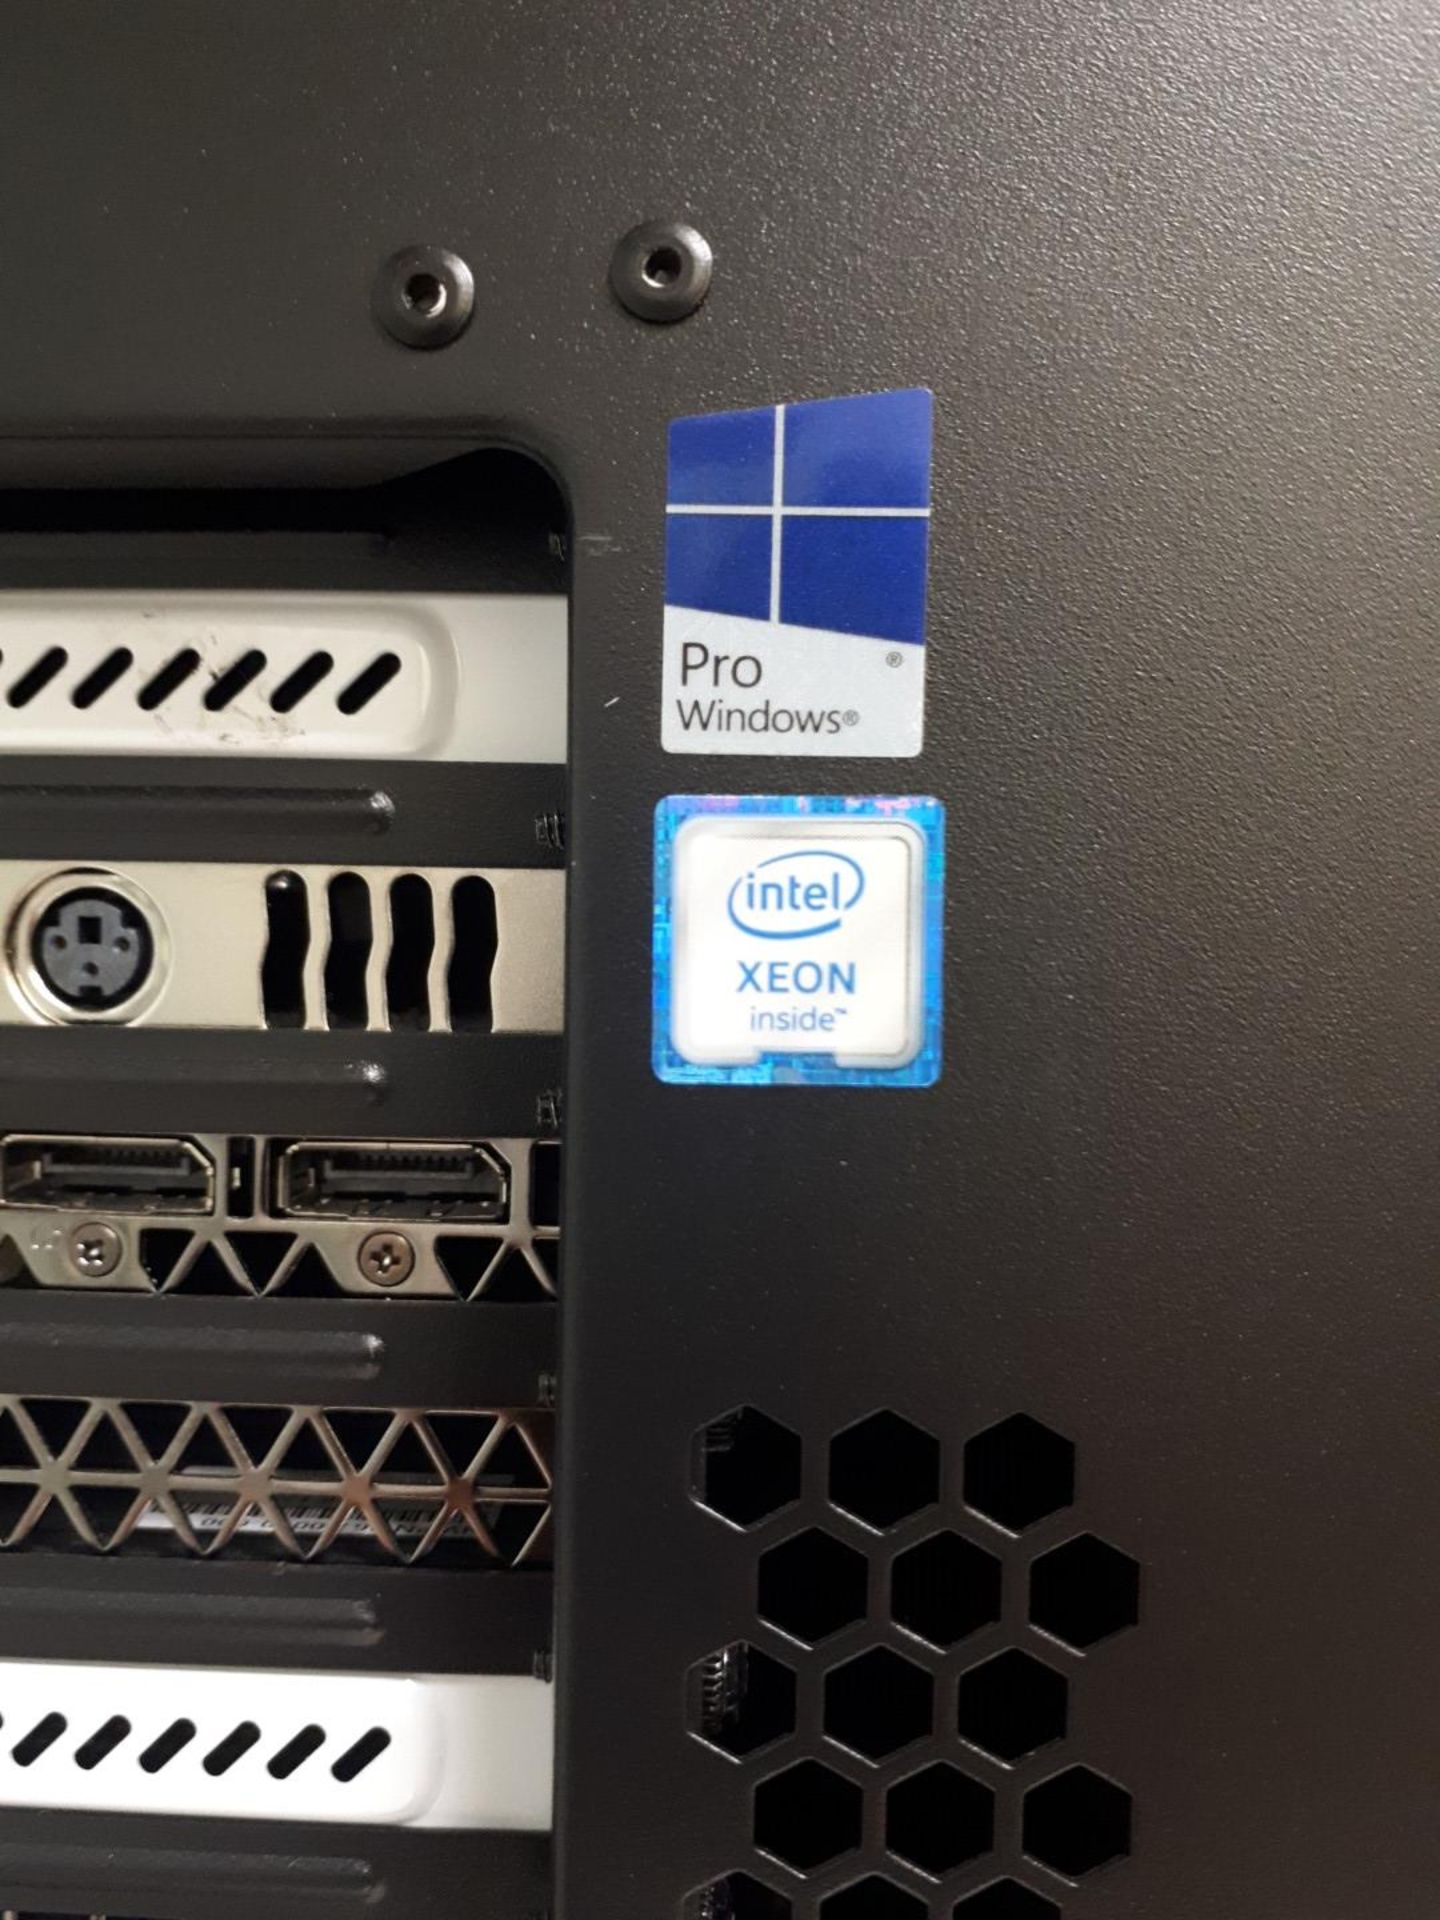 Asus Intel Xeon Inside Tower Server - Image 4 of 5